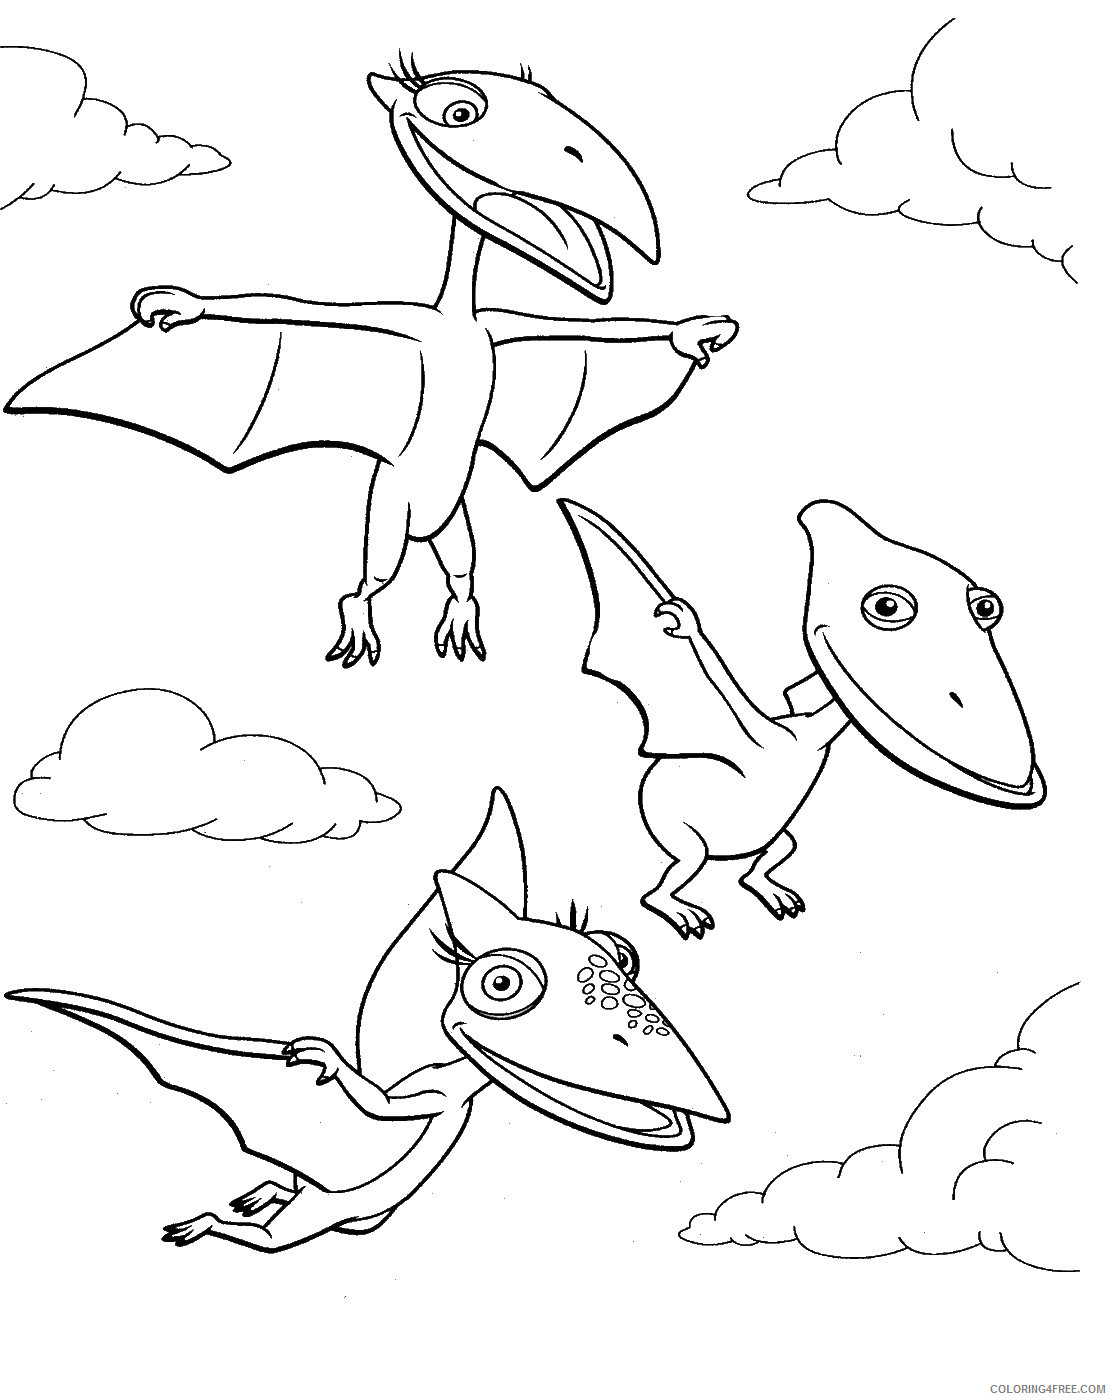 Dinosaur Train Coloring Pages Cartoons dino_train_cl_26 Printable 2020 2247 Coloring4free